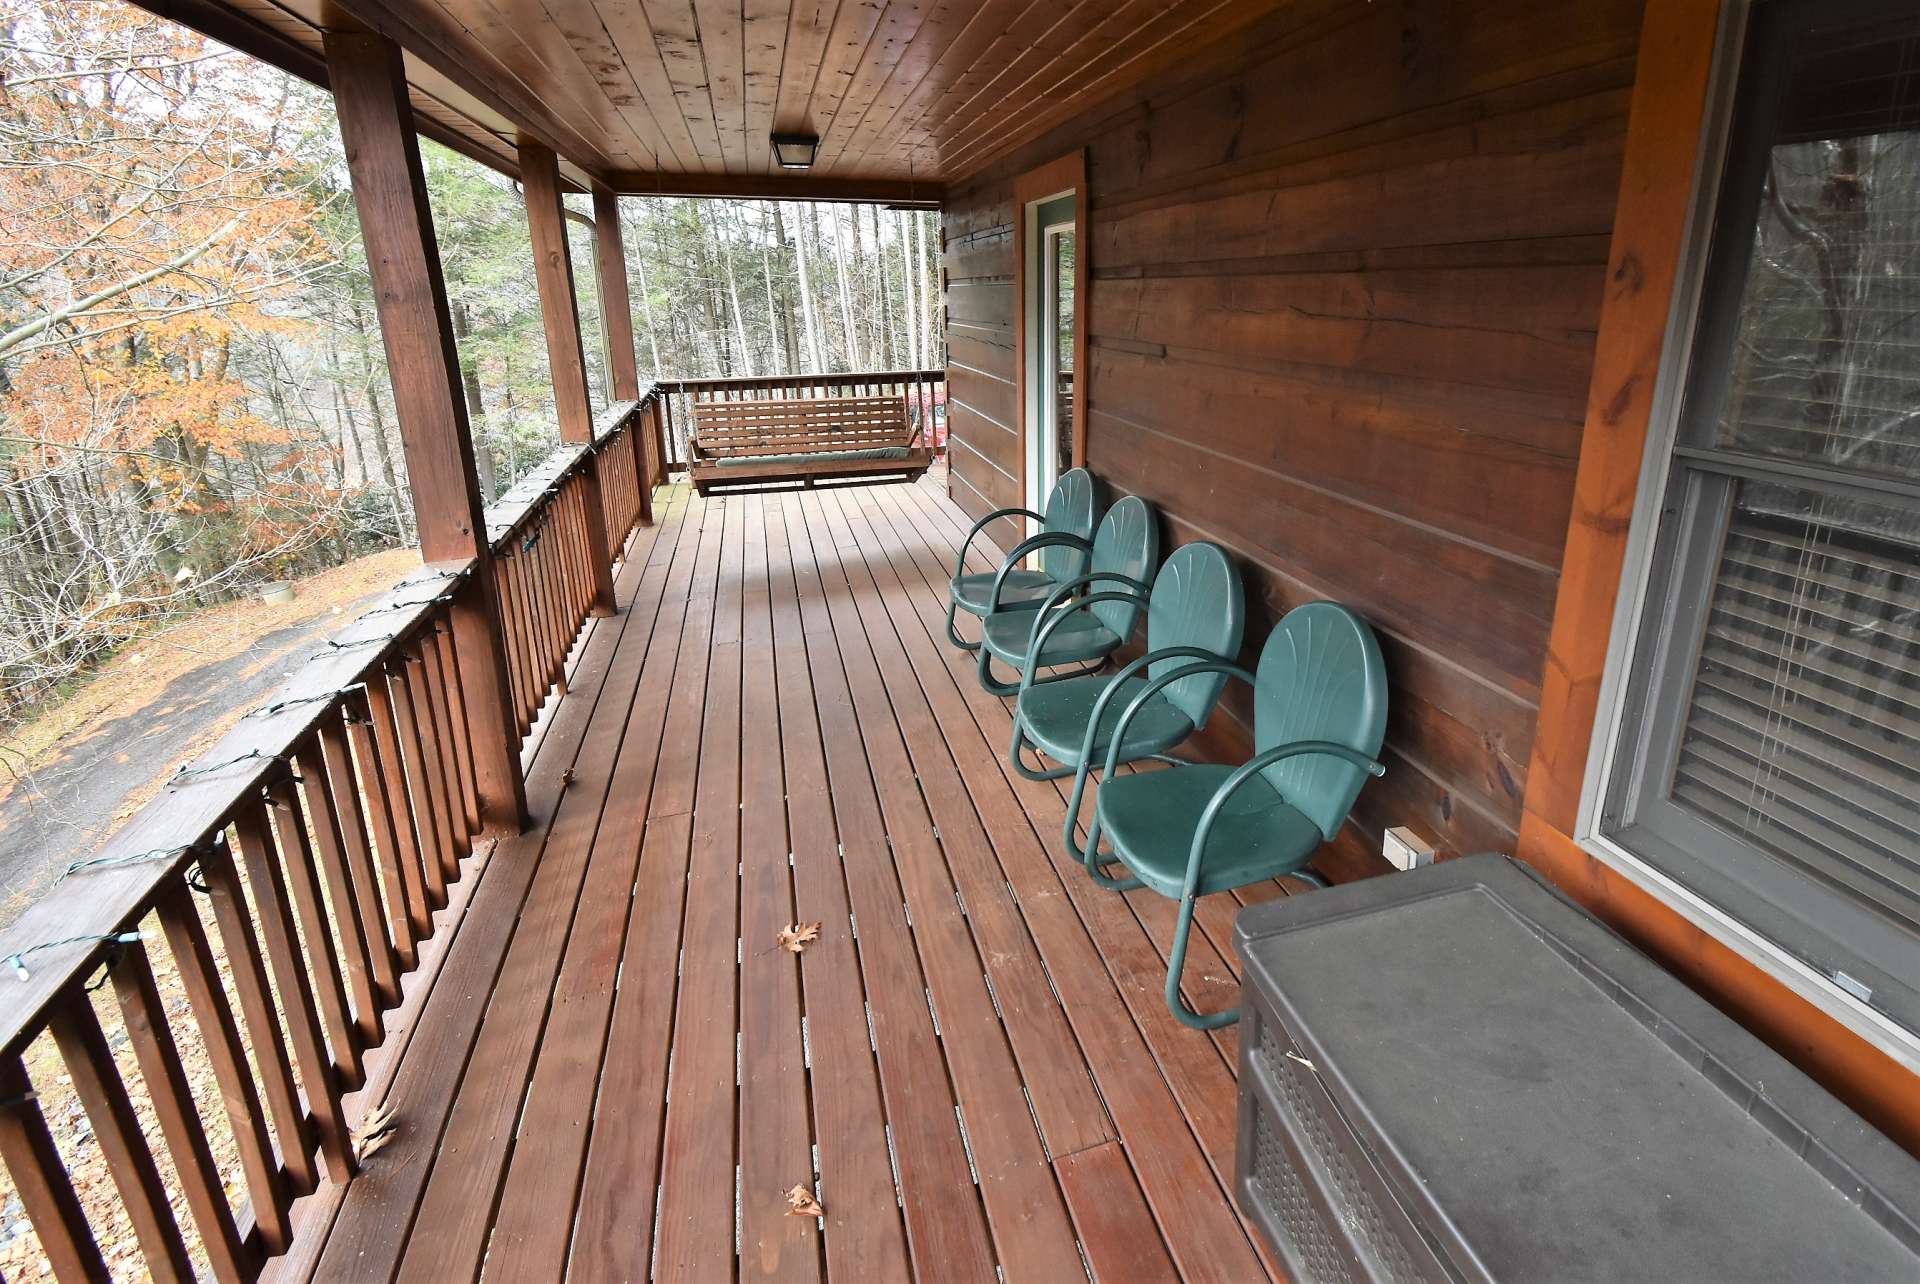 A full length covered back deck offers a place for relaxing with Nature or entertaining.